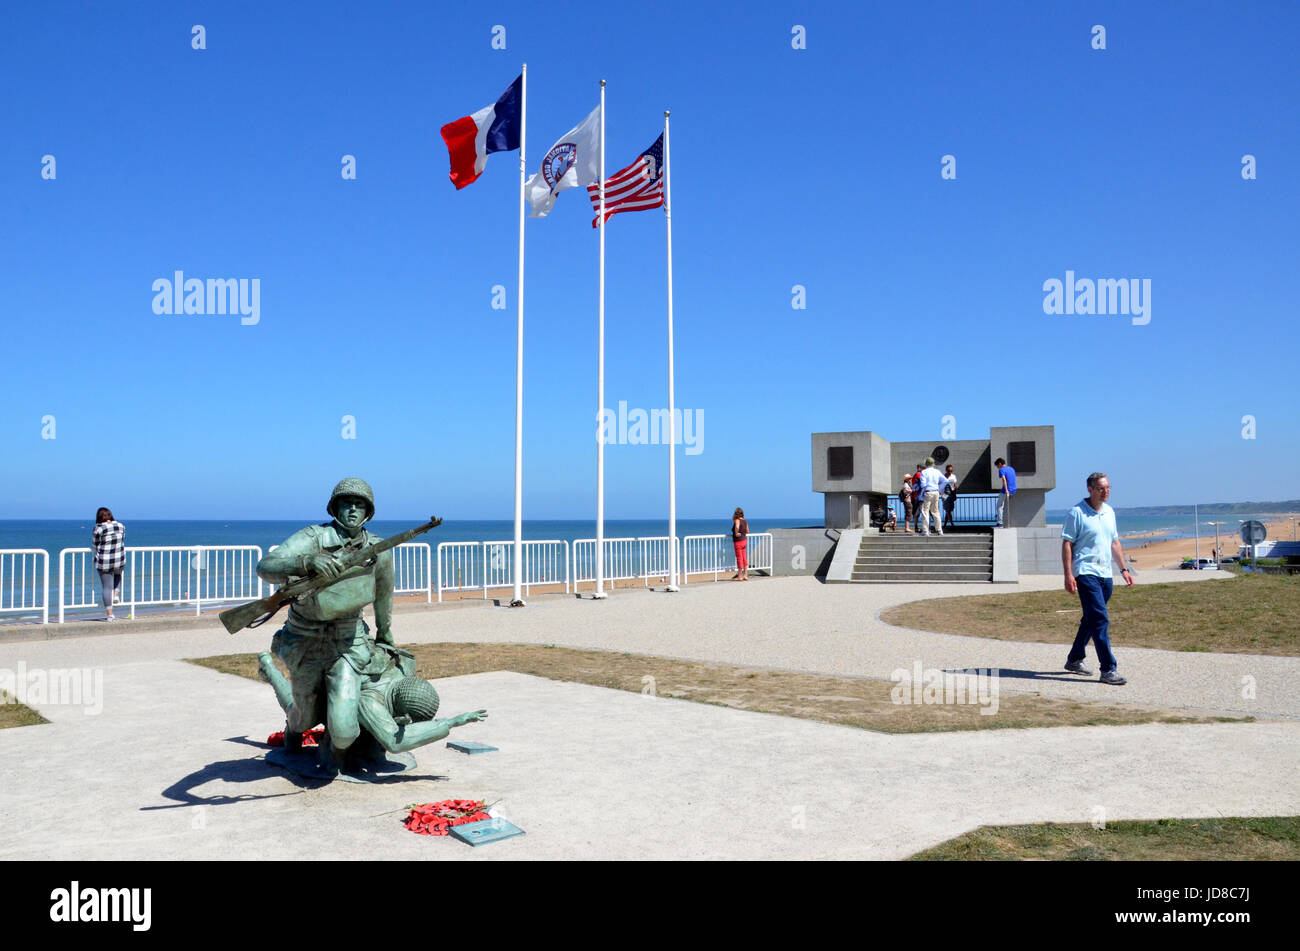 VIERVILLE-SUR-MER, FRANCE - AUG 12:  The 116th Regimental Combat Team Statue and Plaque is shown at Omaha Beach in Vierville-sur-Mer, France on August Stock Photo